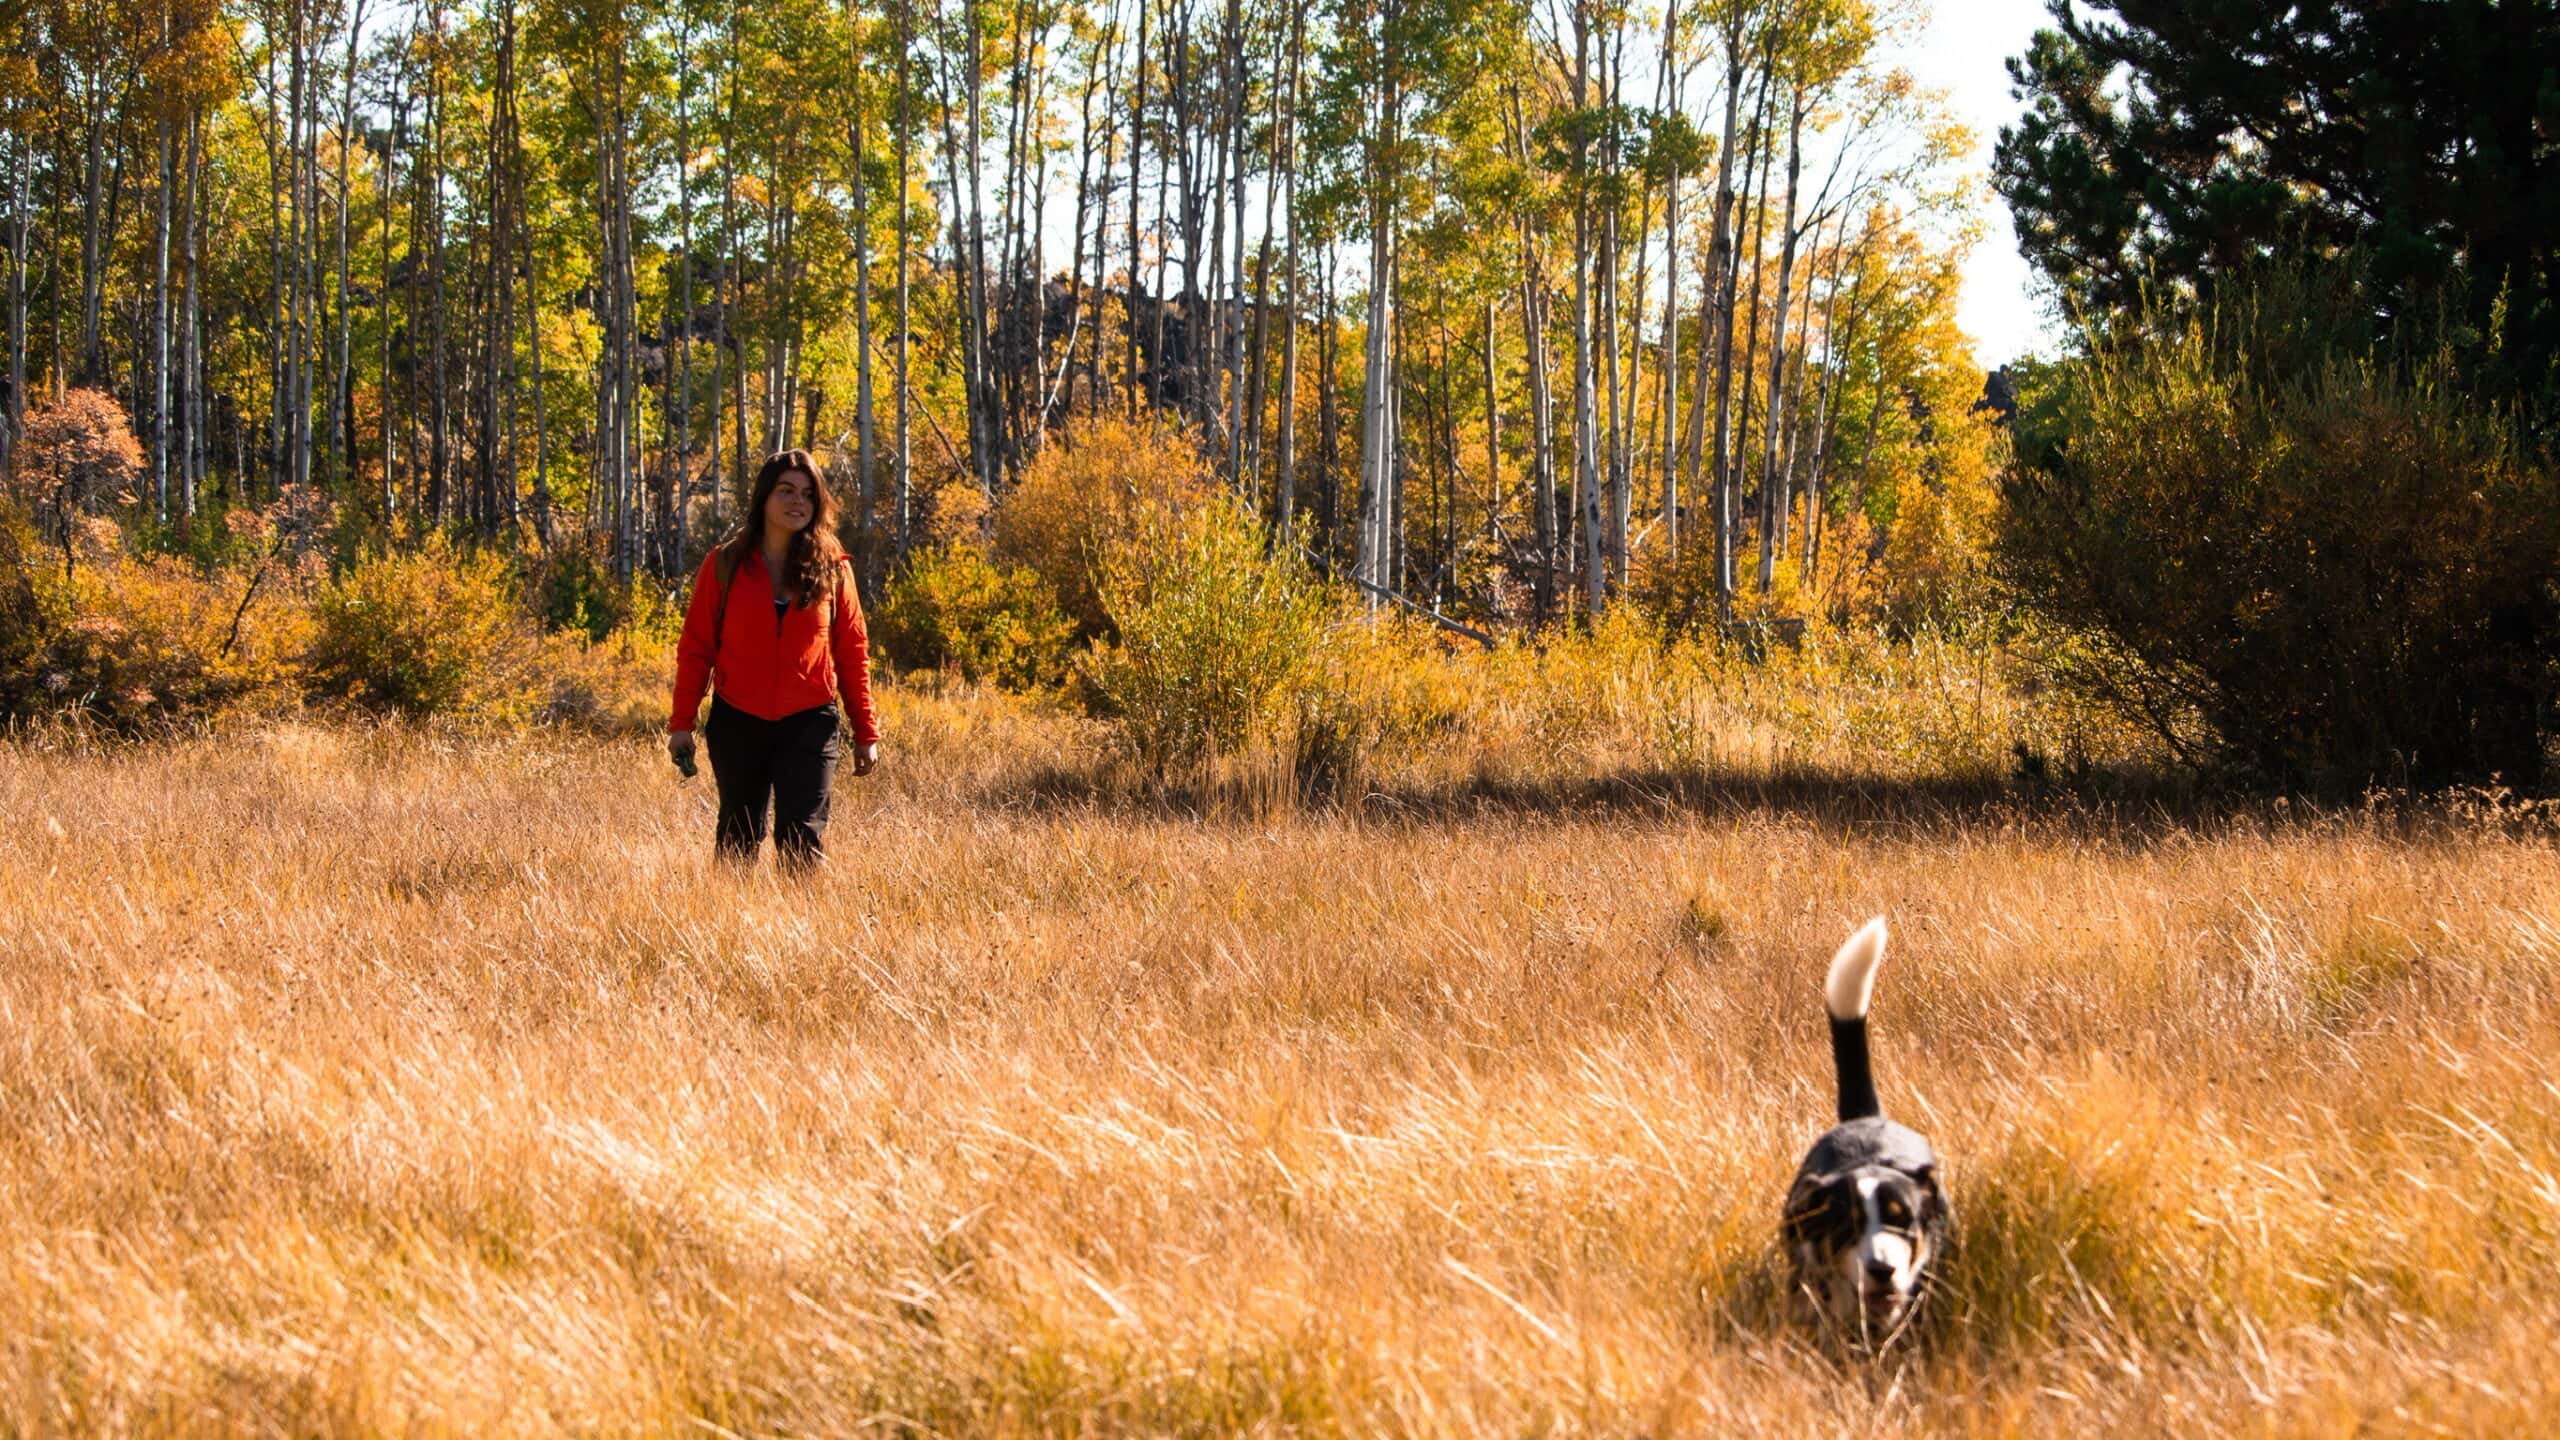 A woman and her dog walk in a field of tall golden grass.